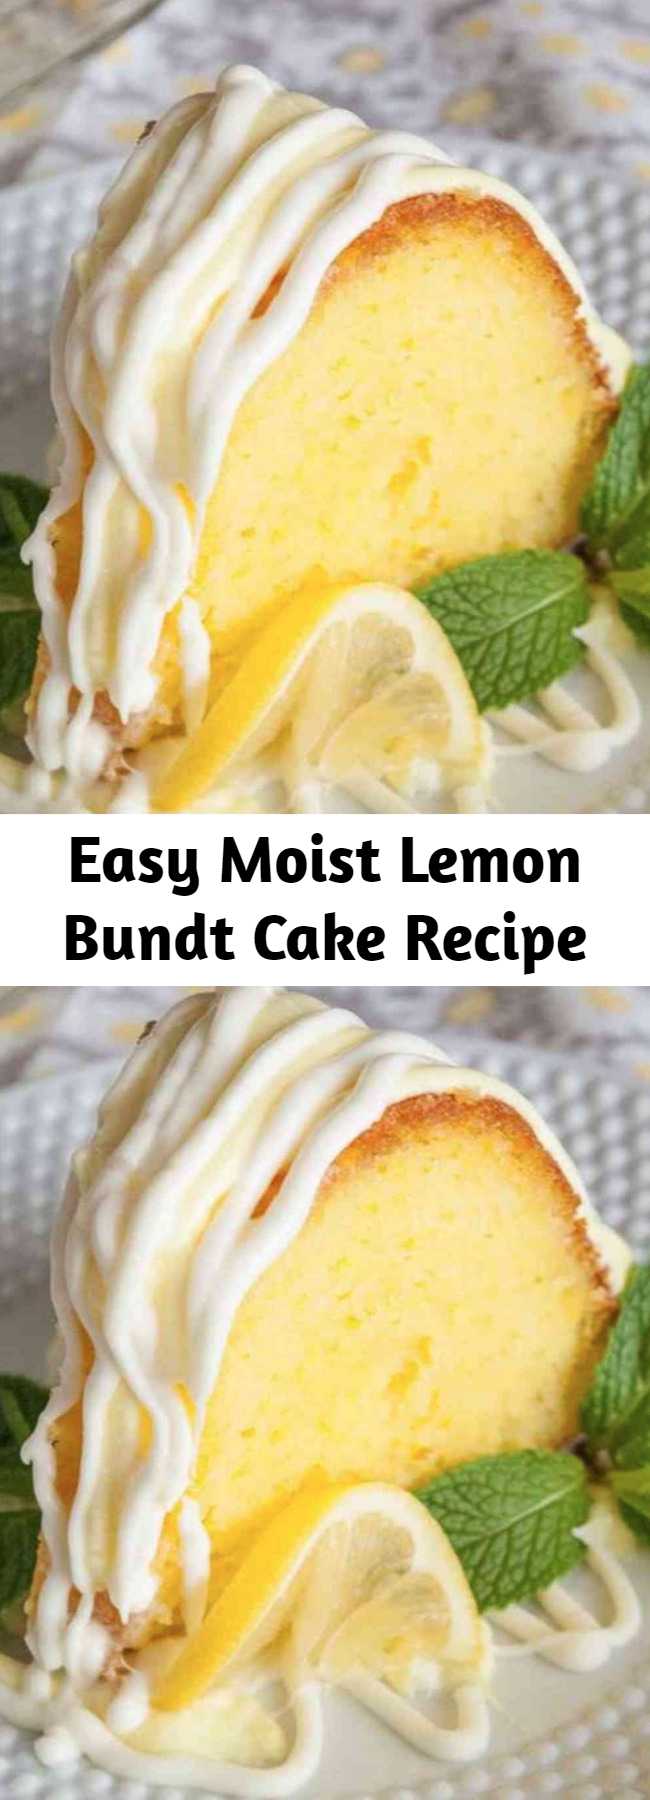 Easy Moist Lemon Bundt Cake Recipe - This easy lemon bundt cake drizzled with lemon cream cheese frosting is a fantastic nearly from scratch dessert! It’s super moist and super tasty!